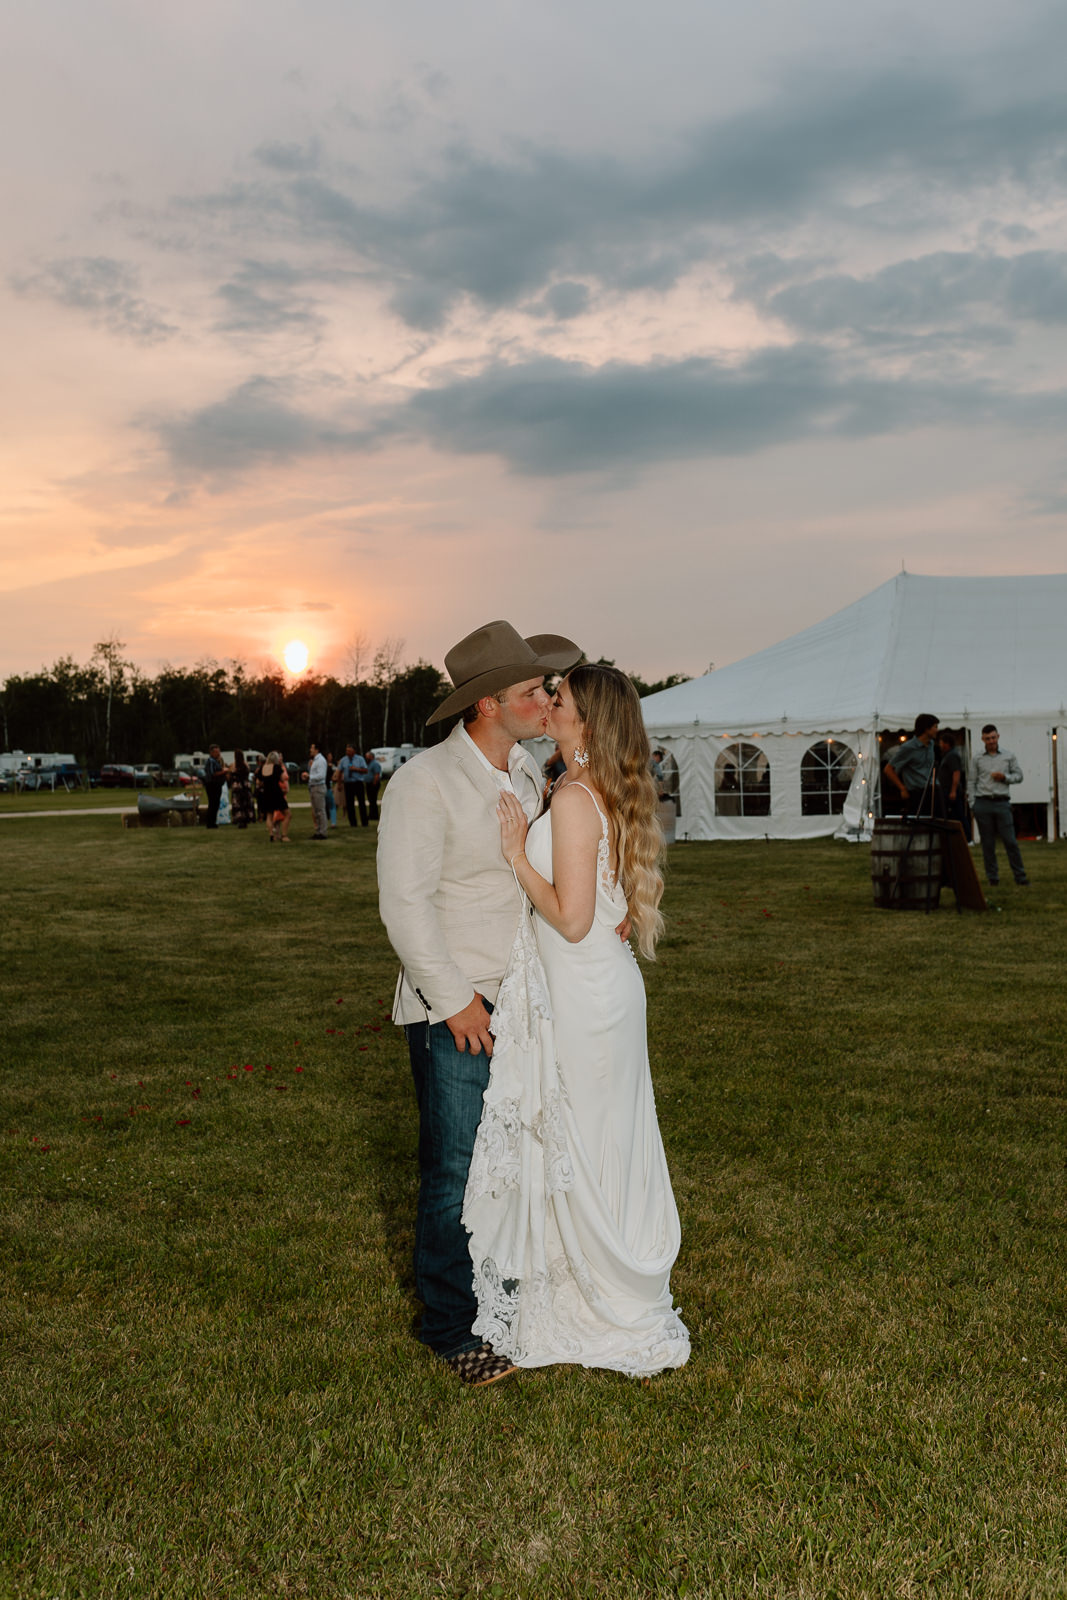 A country couple celebrating their rustic western wedding with their horses